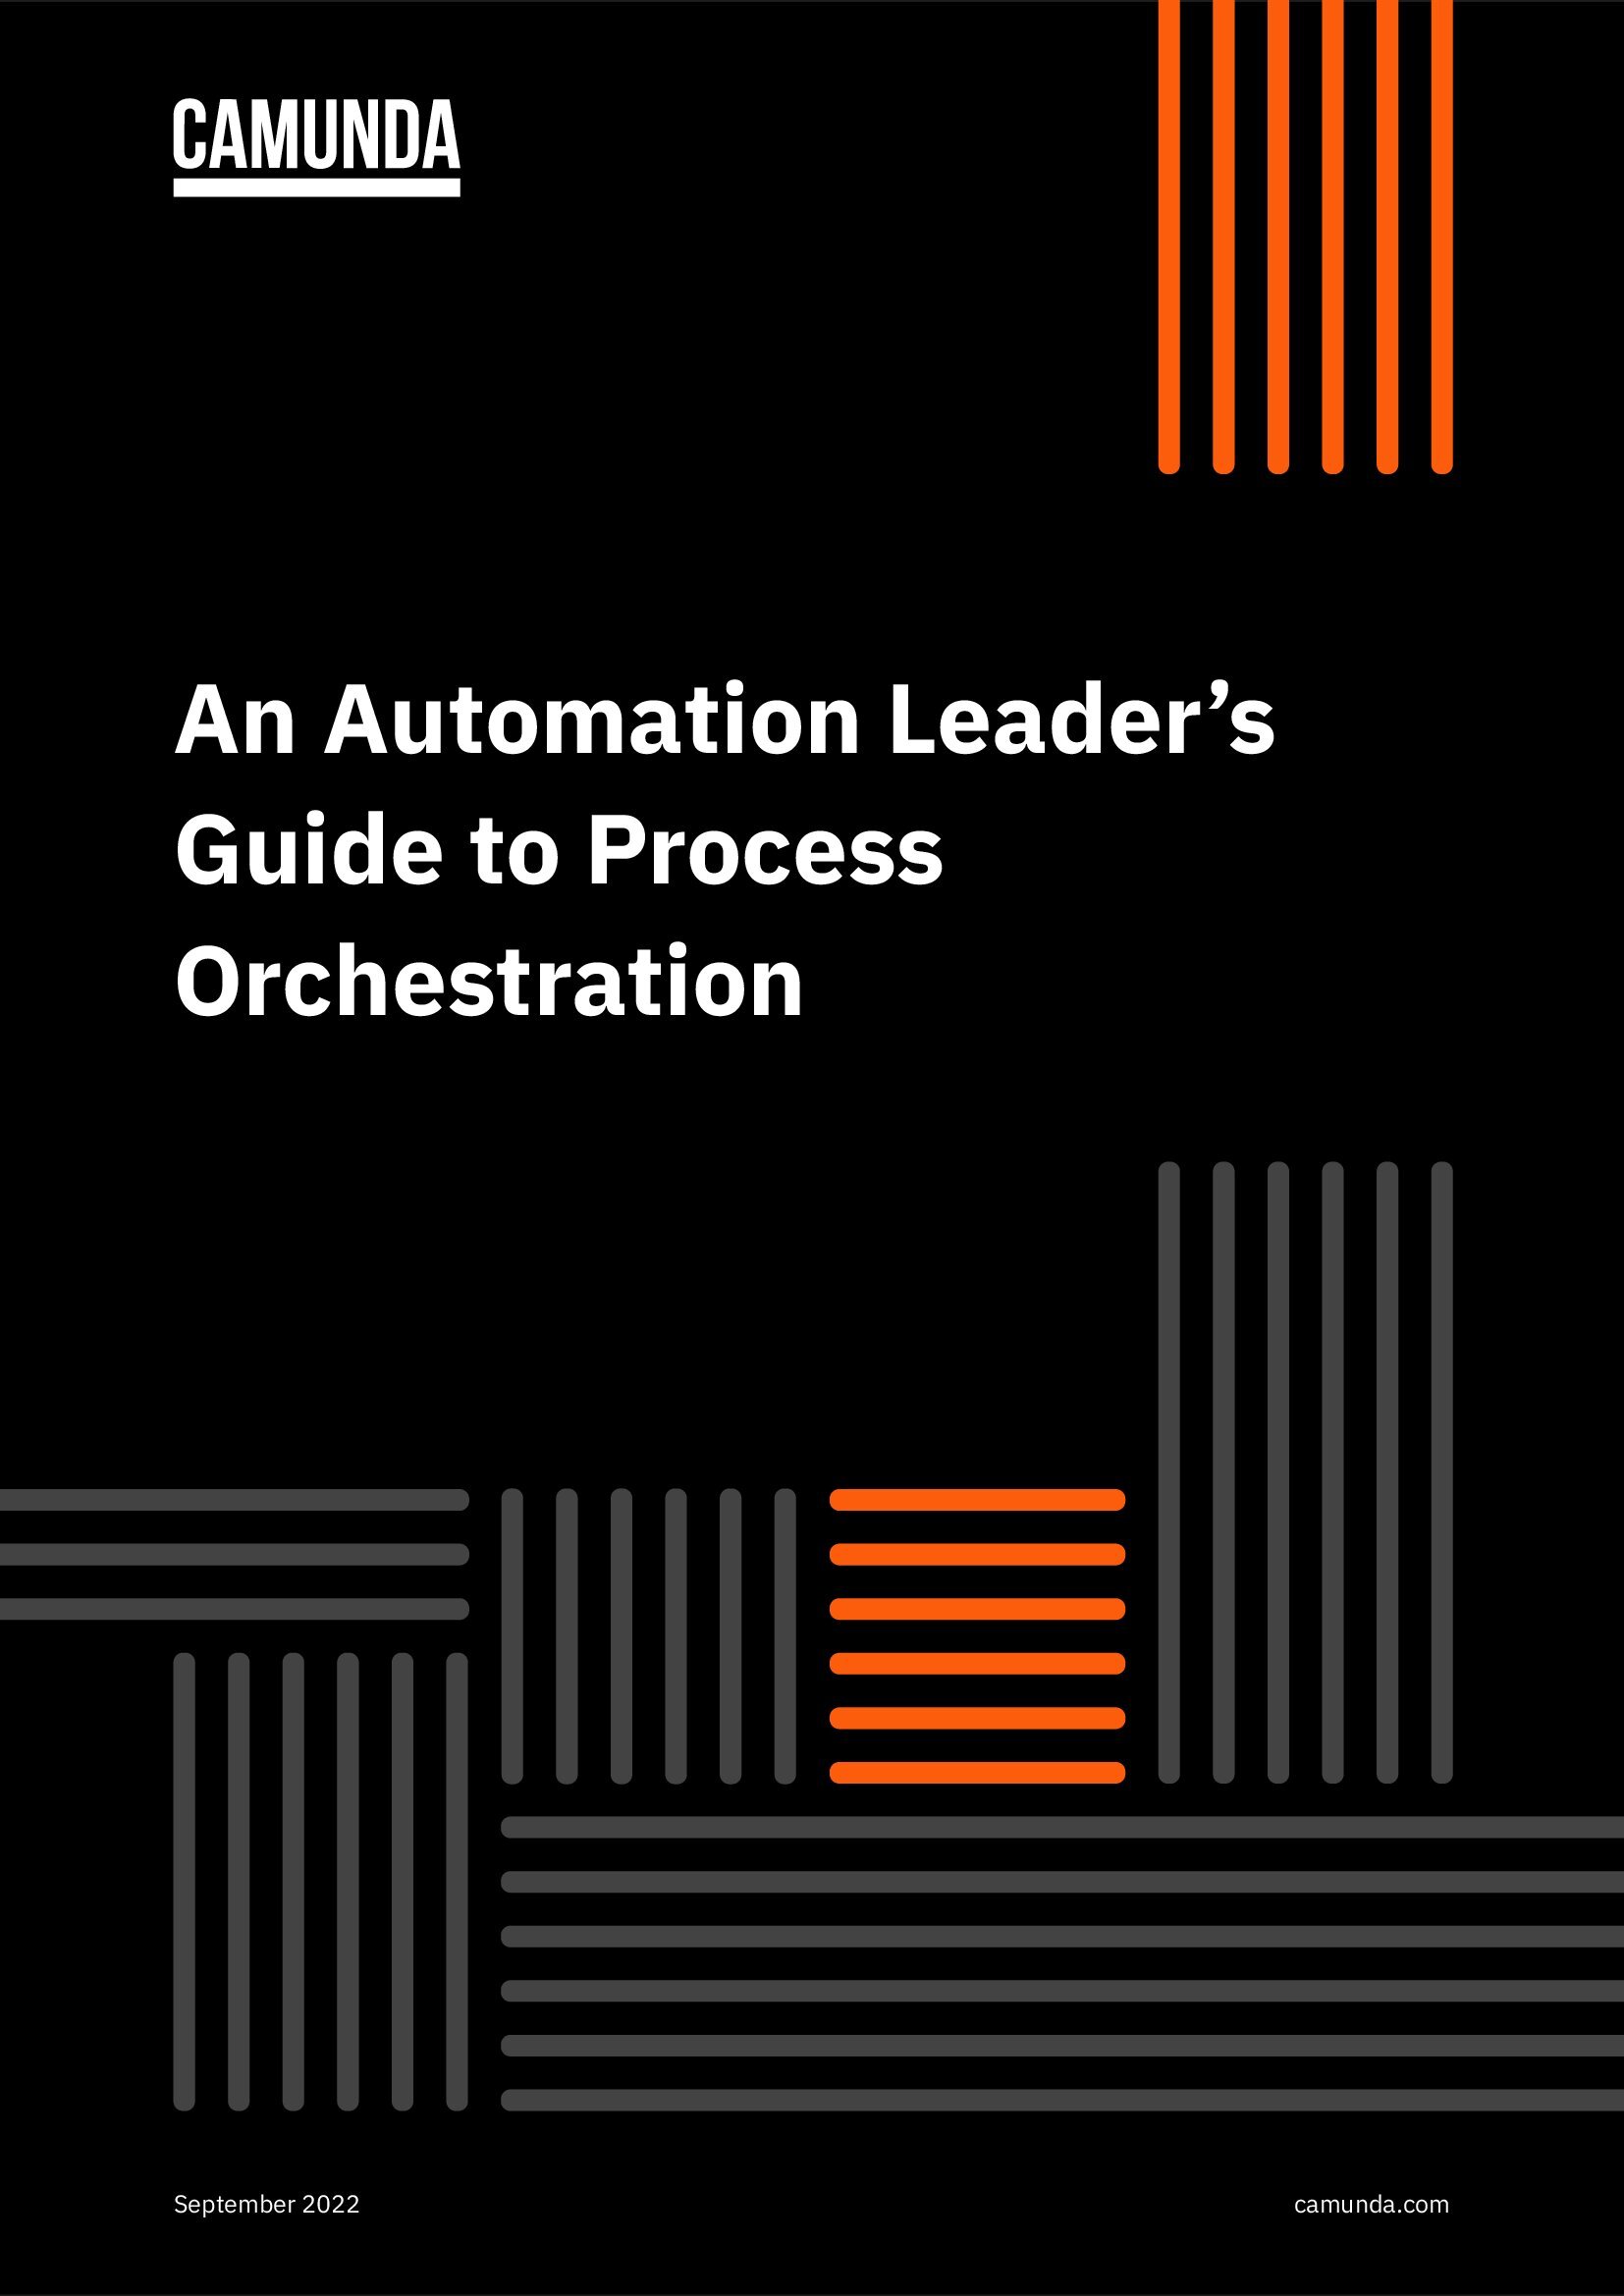 EN-Automation-Leaders-Guide-to-Process-Orchestration_00001